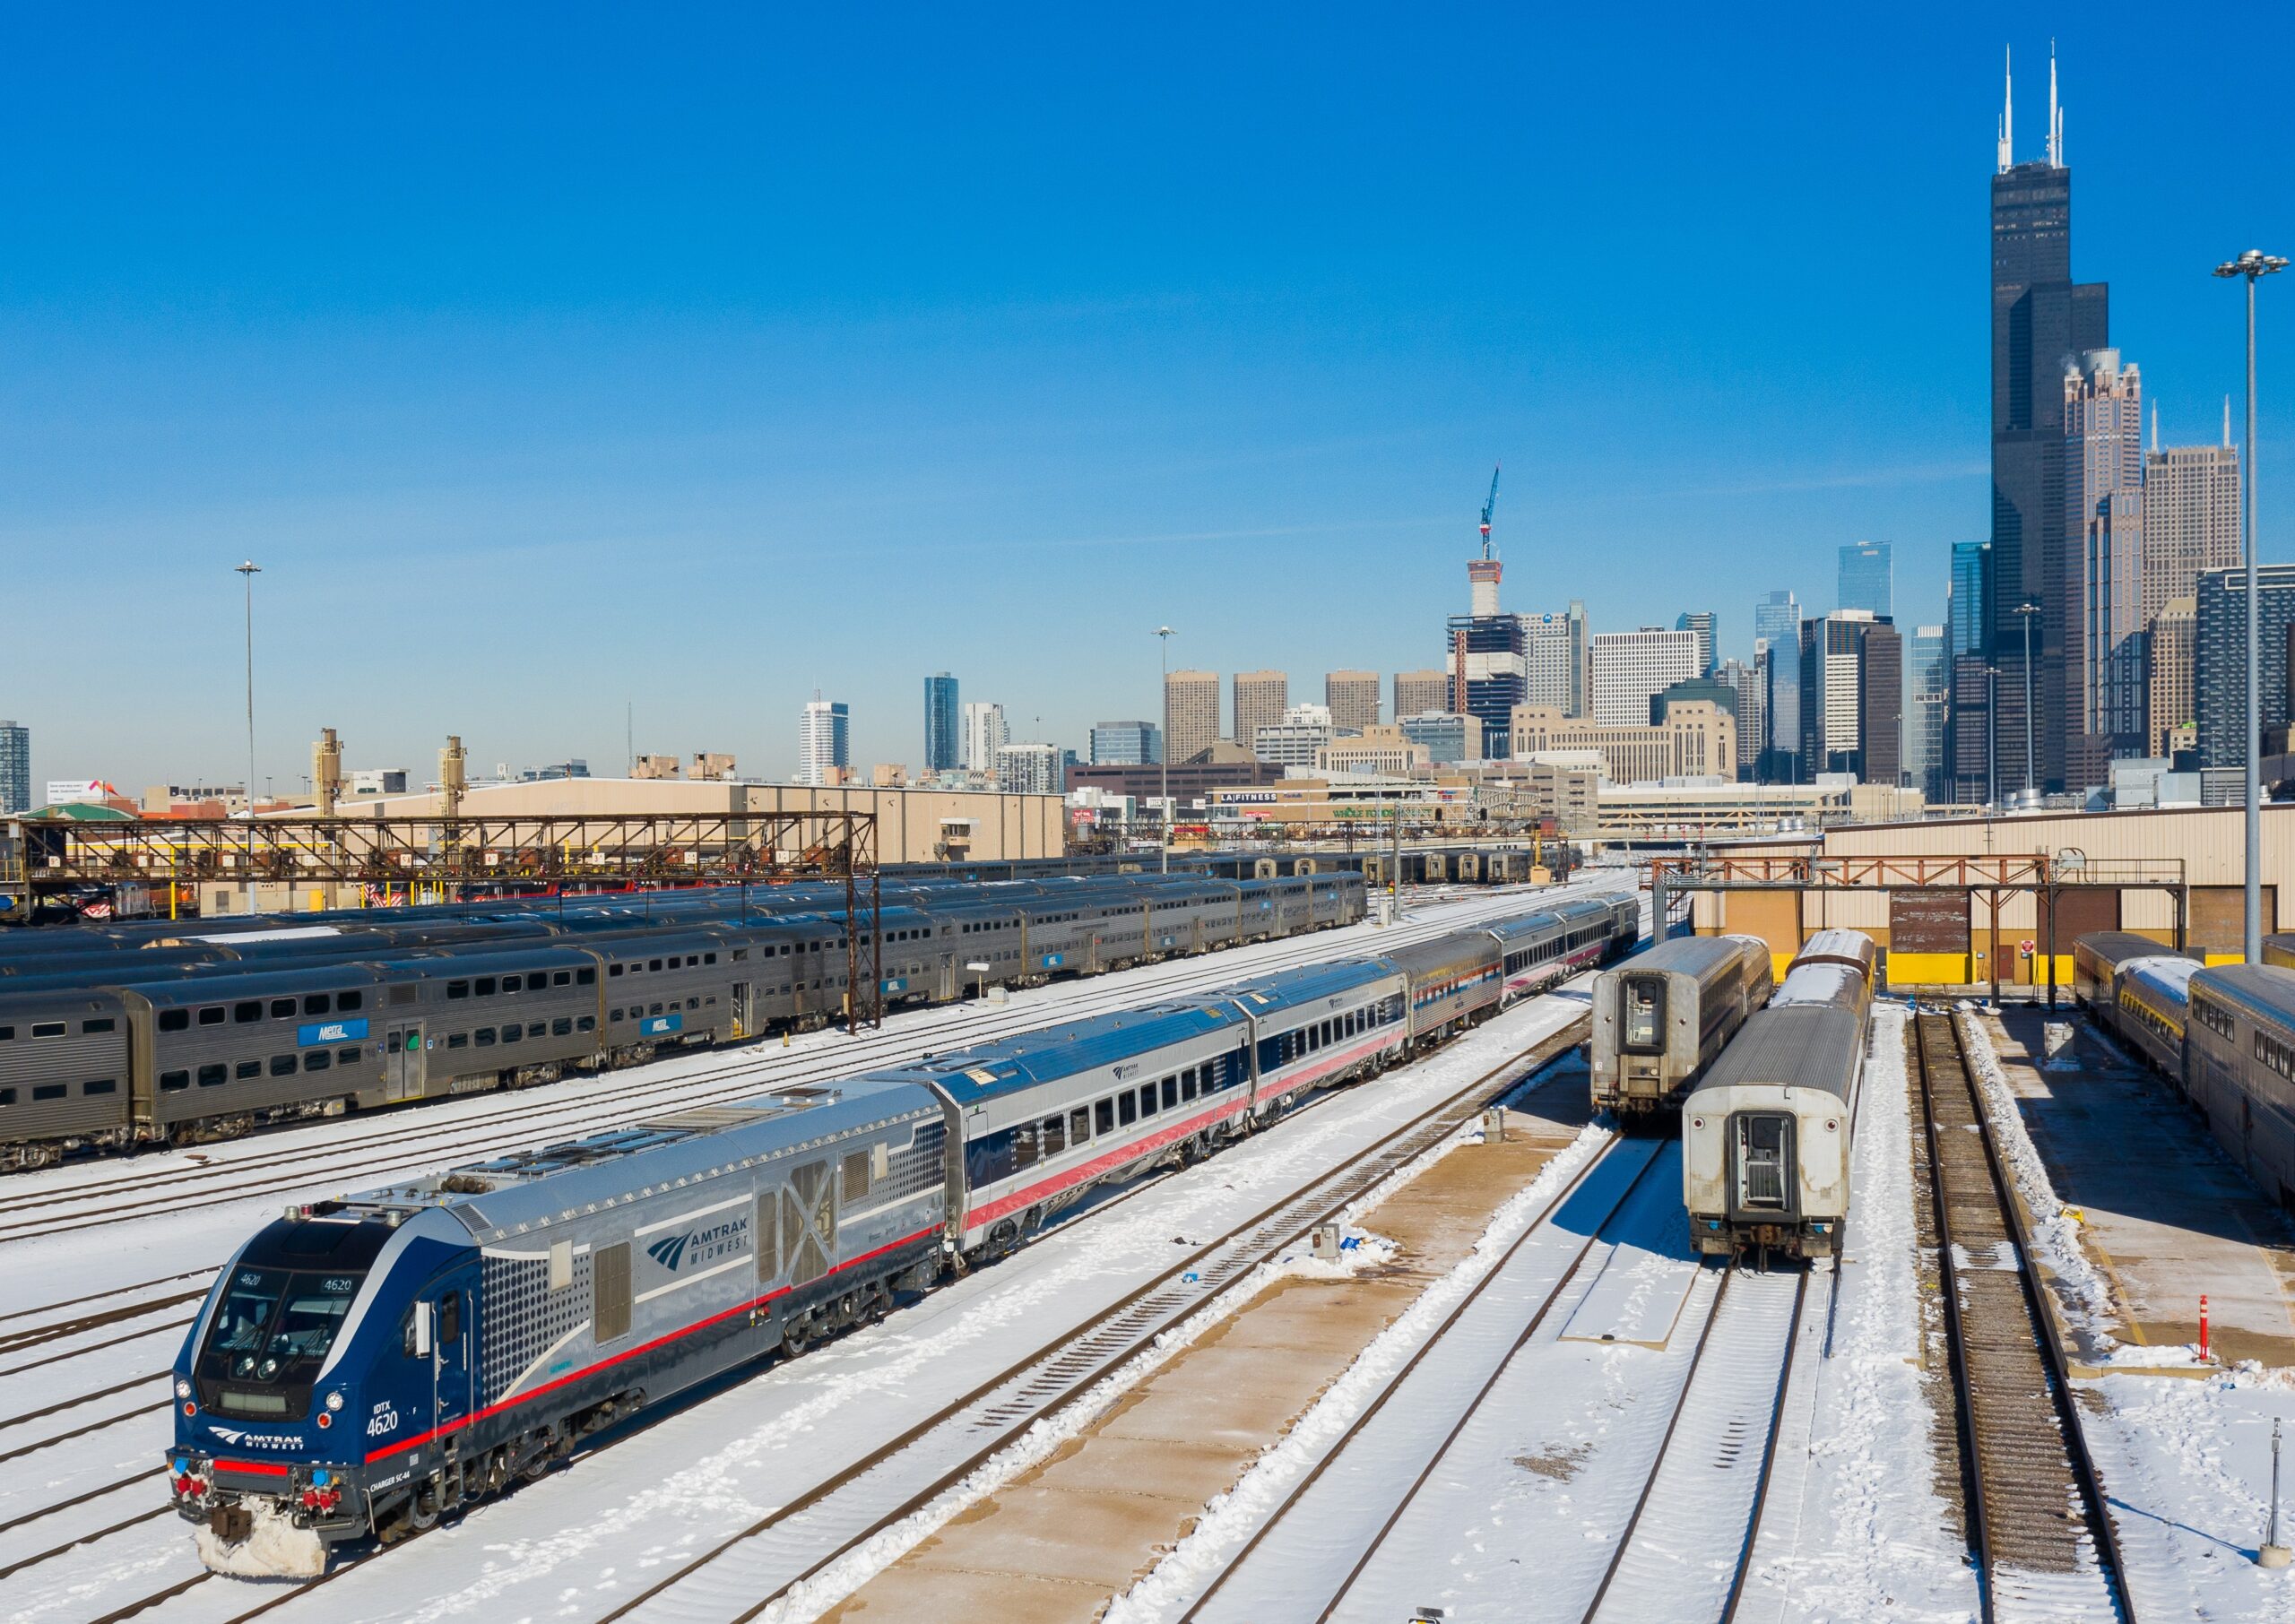 new-amtrak-railcar-made-by-siemens-mobility-scaled.jpg